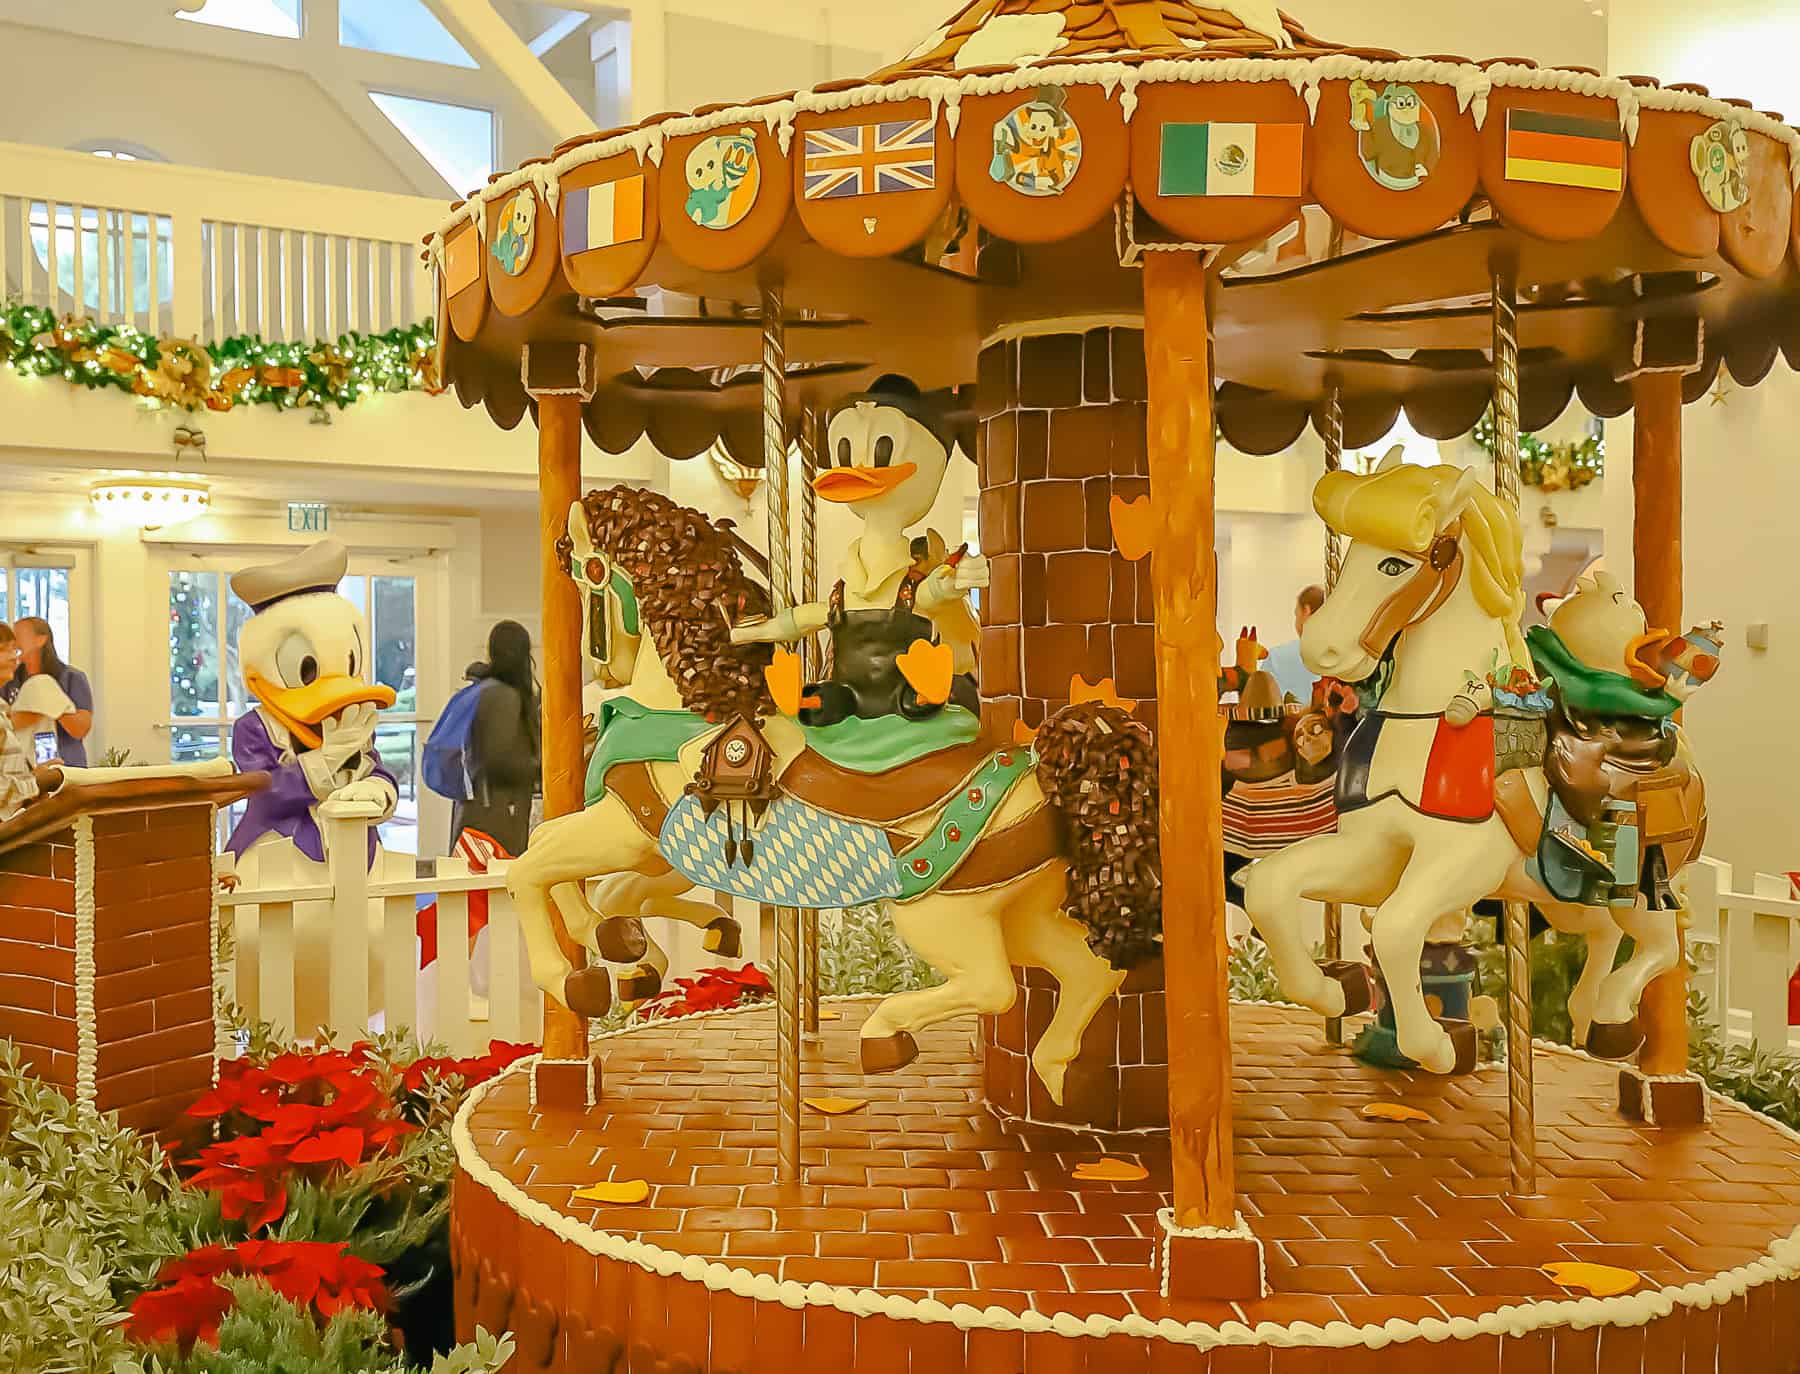 The 2023 Disney's Beach Club Carousel with Ducktales theming